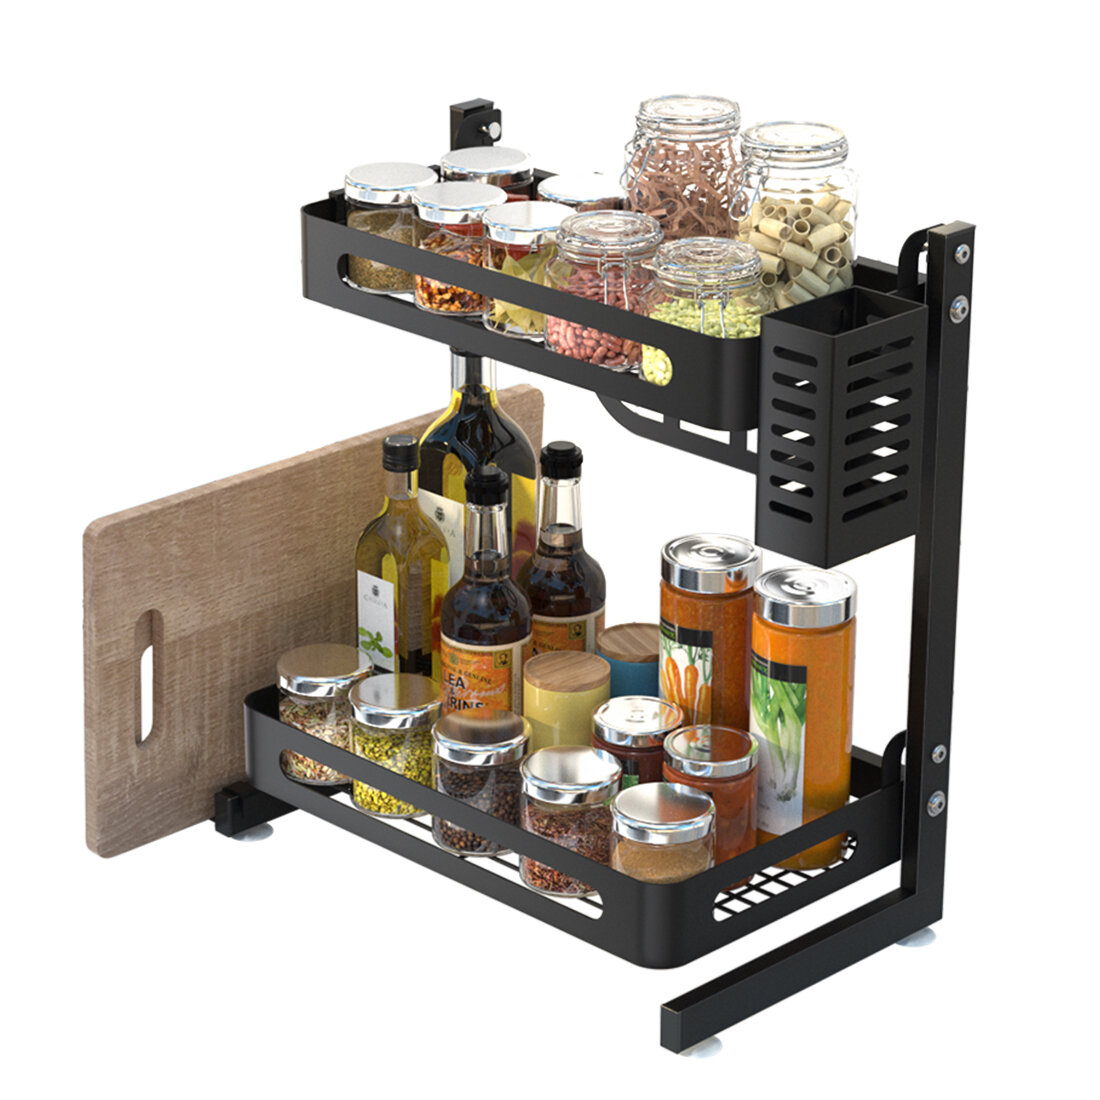 Spice rack stainless steel